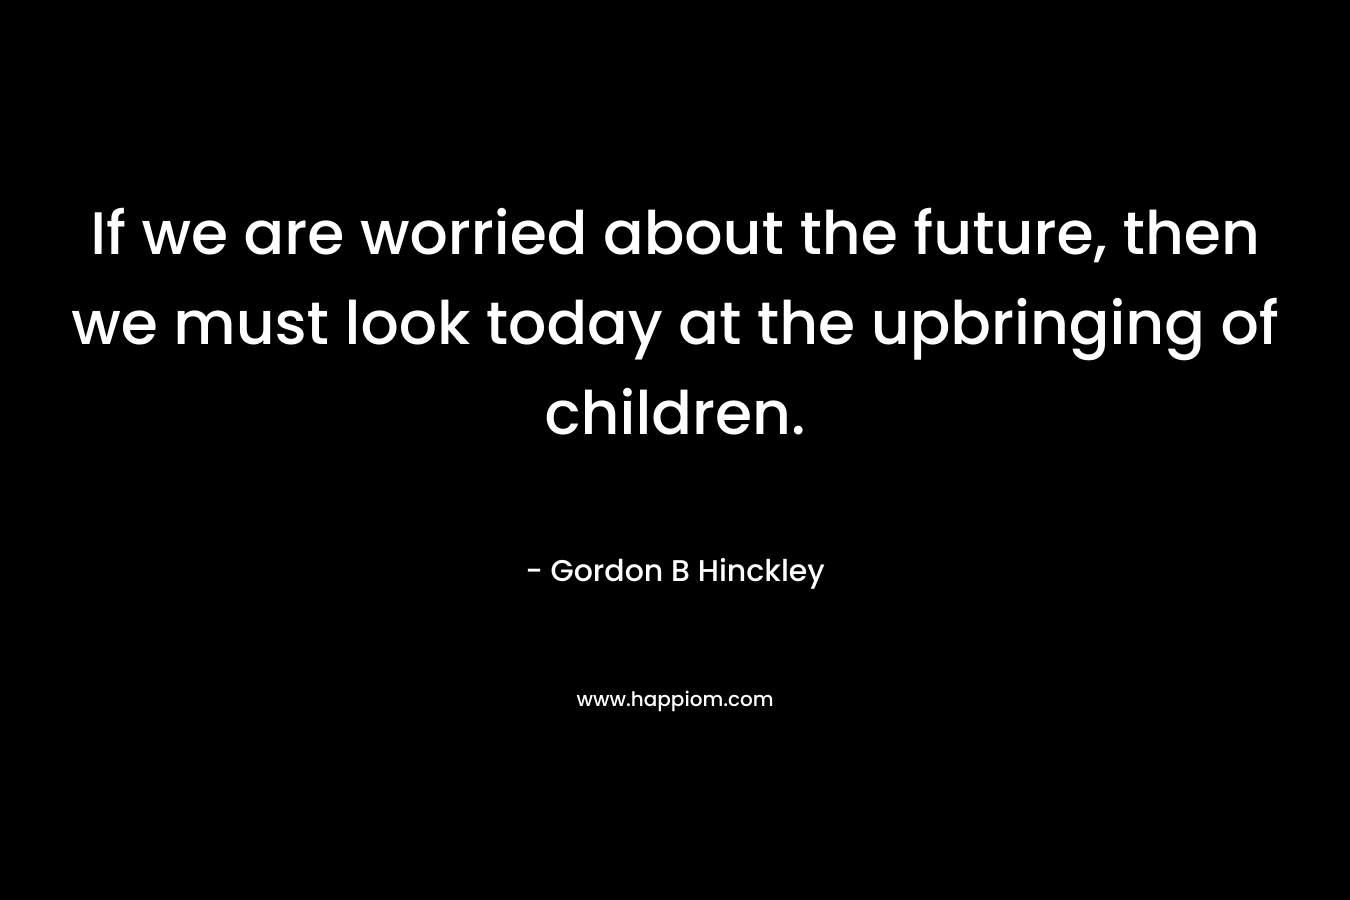 If we are worried about the future, then we must look today at the upbringing of children. – Gordon B Hinckley